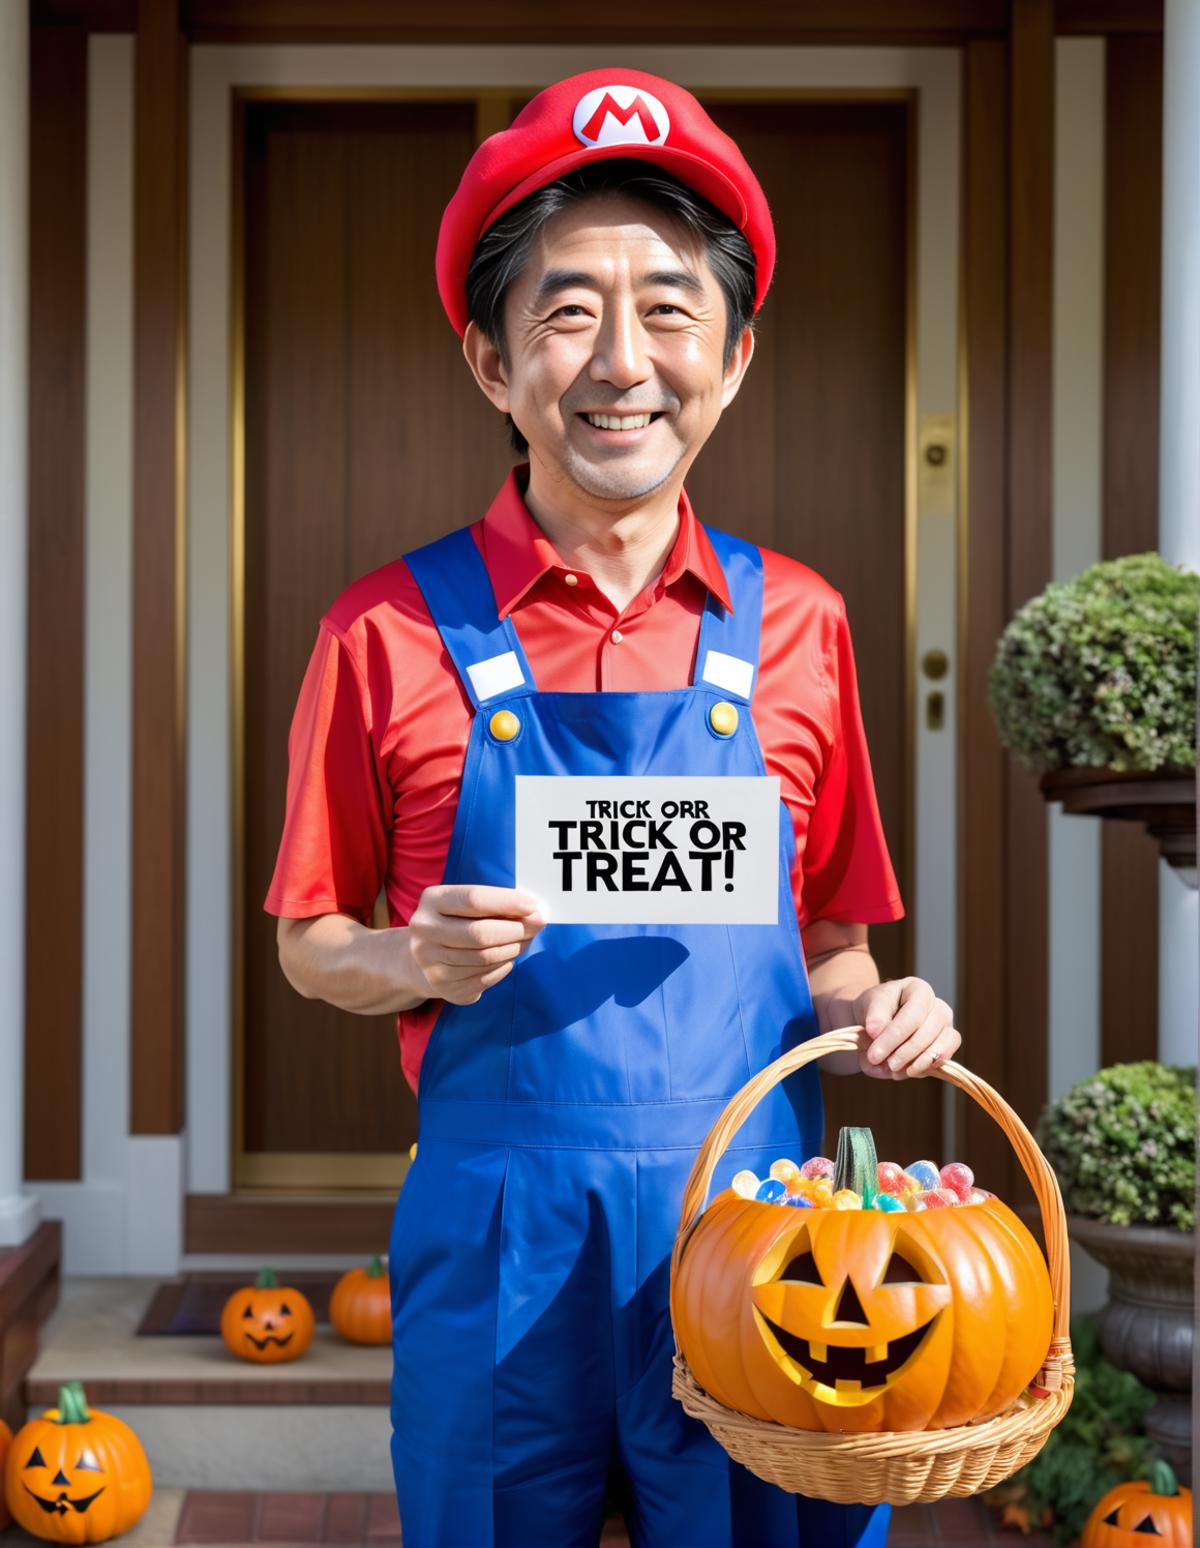 Shinzo Abe, wearing super mario cosplay, (holding a piece of paper with large text "Trick or Treat" written on it:1.2), at...